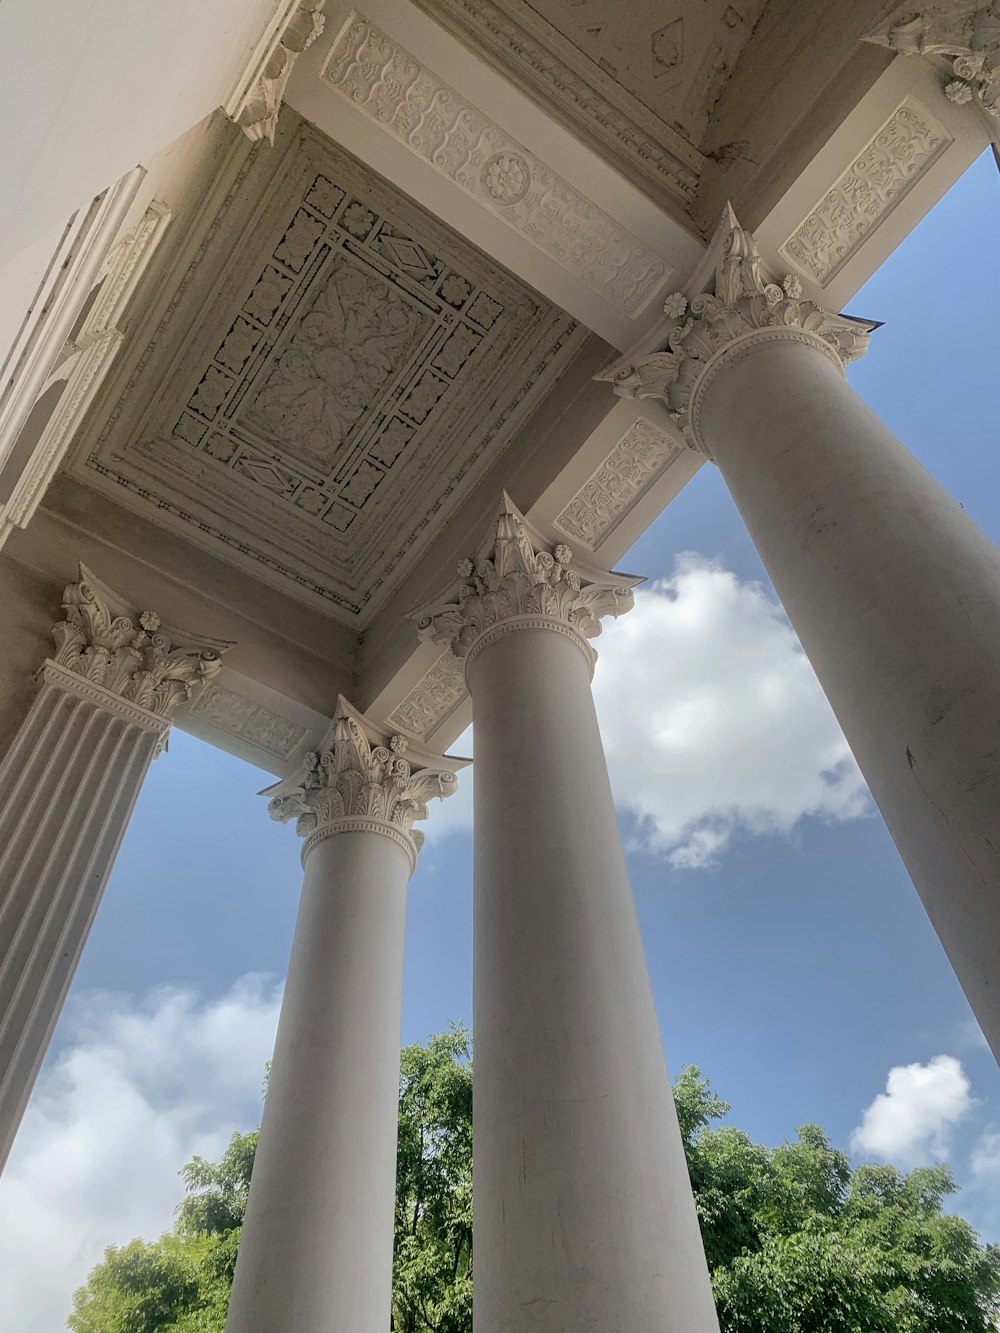 a close-up of the columns of a building